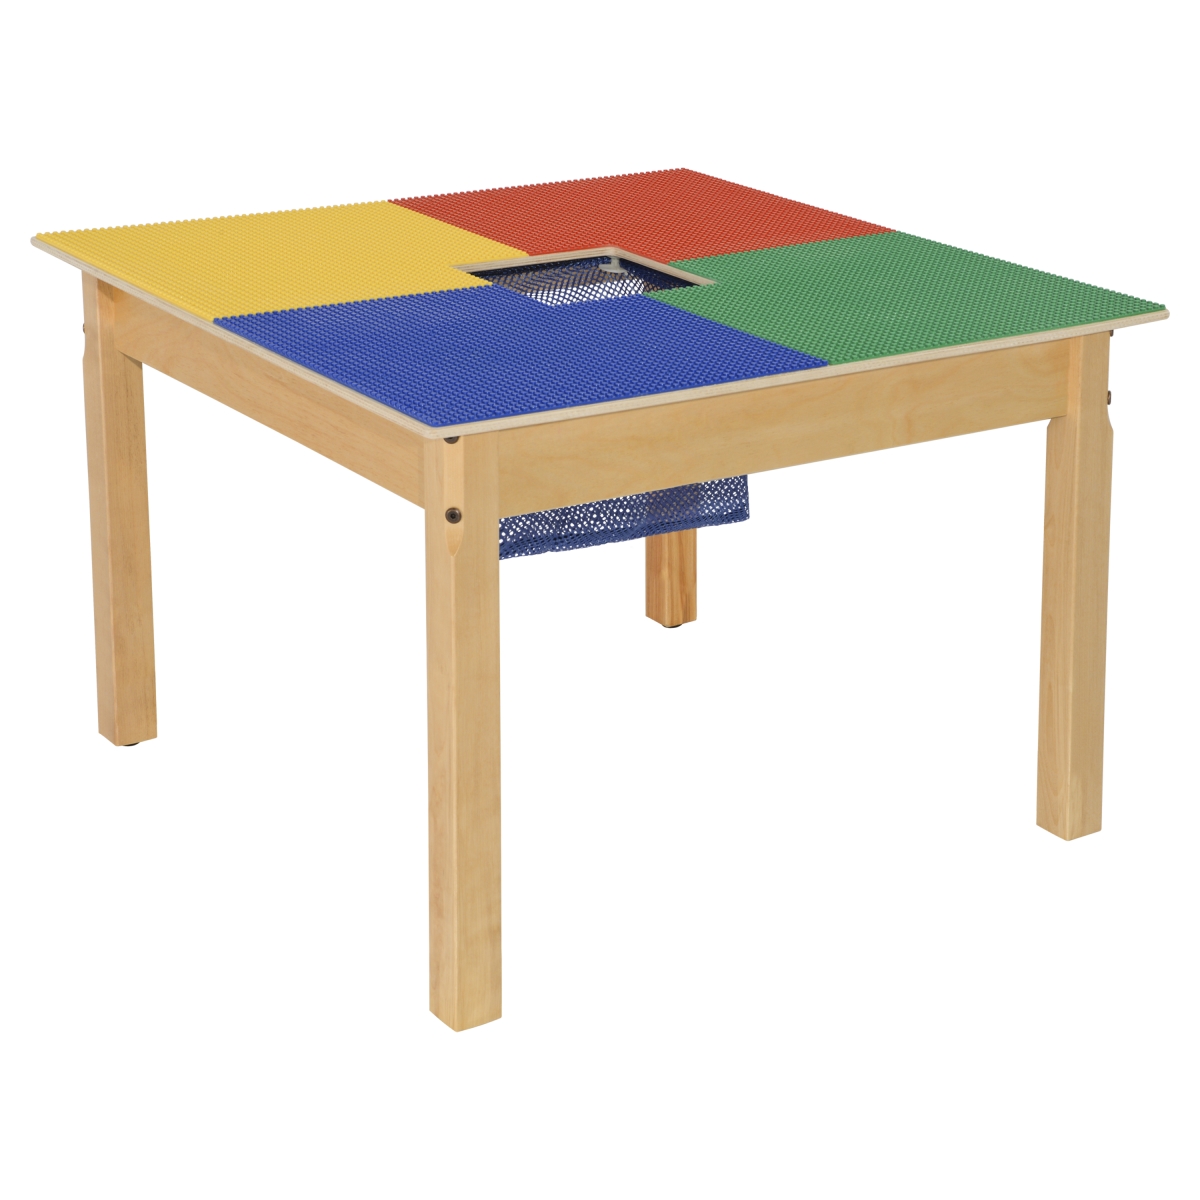 Tp3131sgn20 20 In. Lego Compatible Square Table With Legs, Multi Color